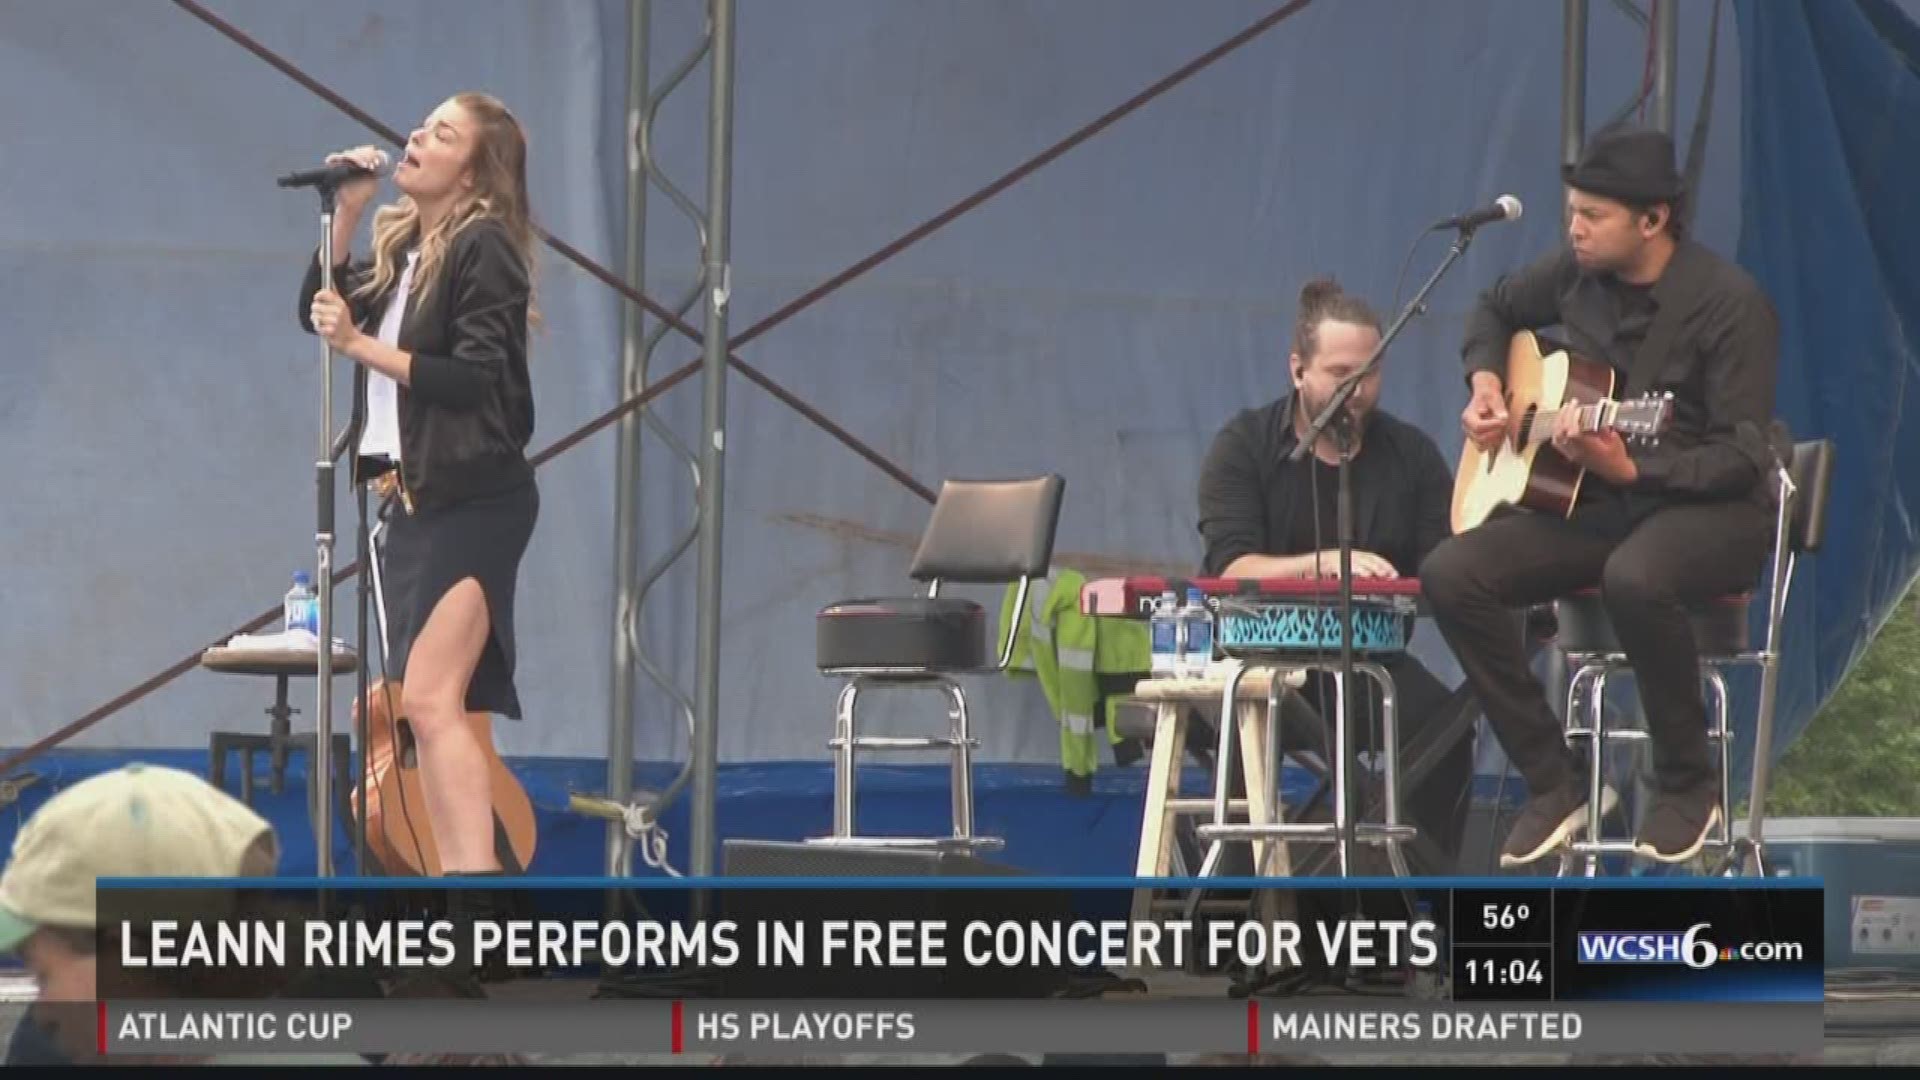 LeAnn Rimes performs in free concert for vets